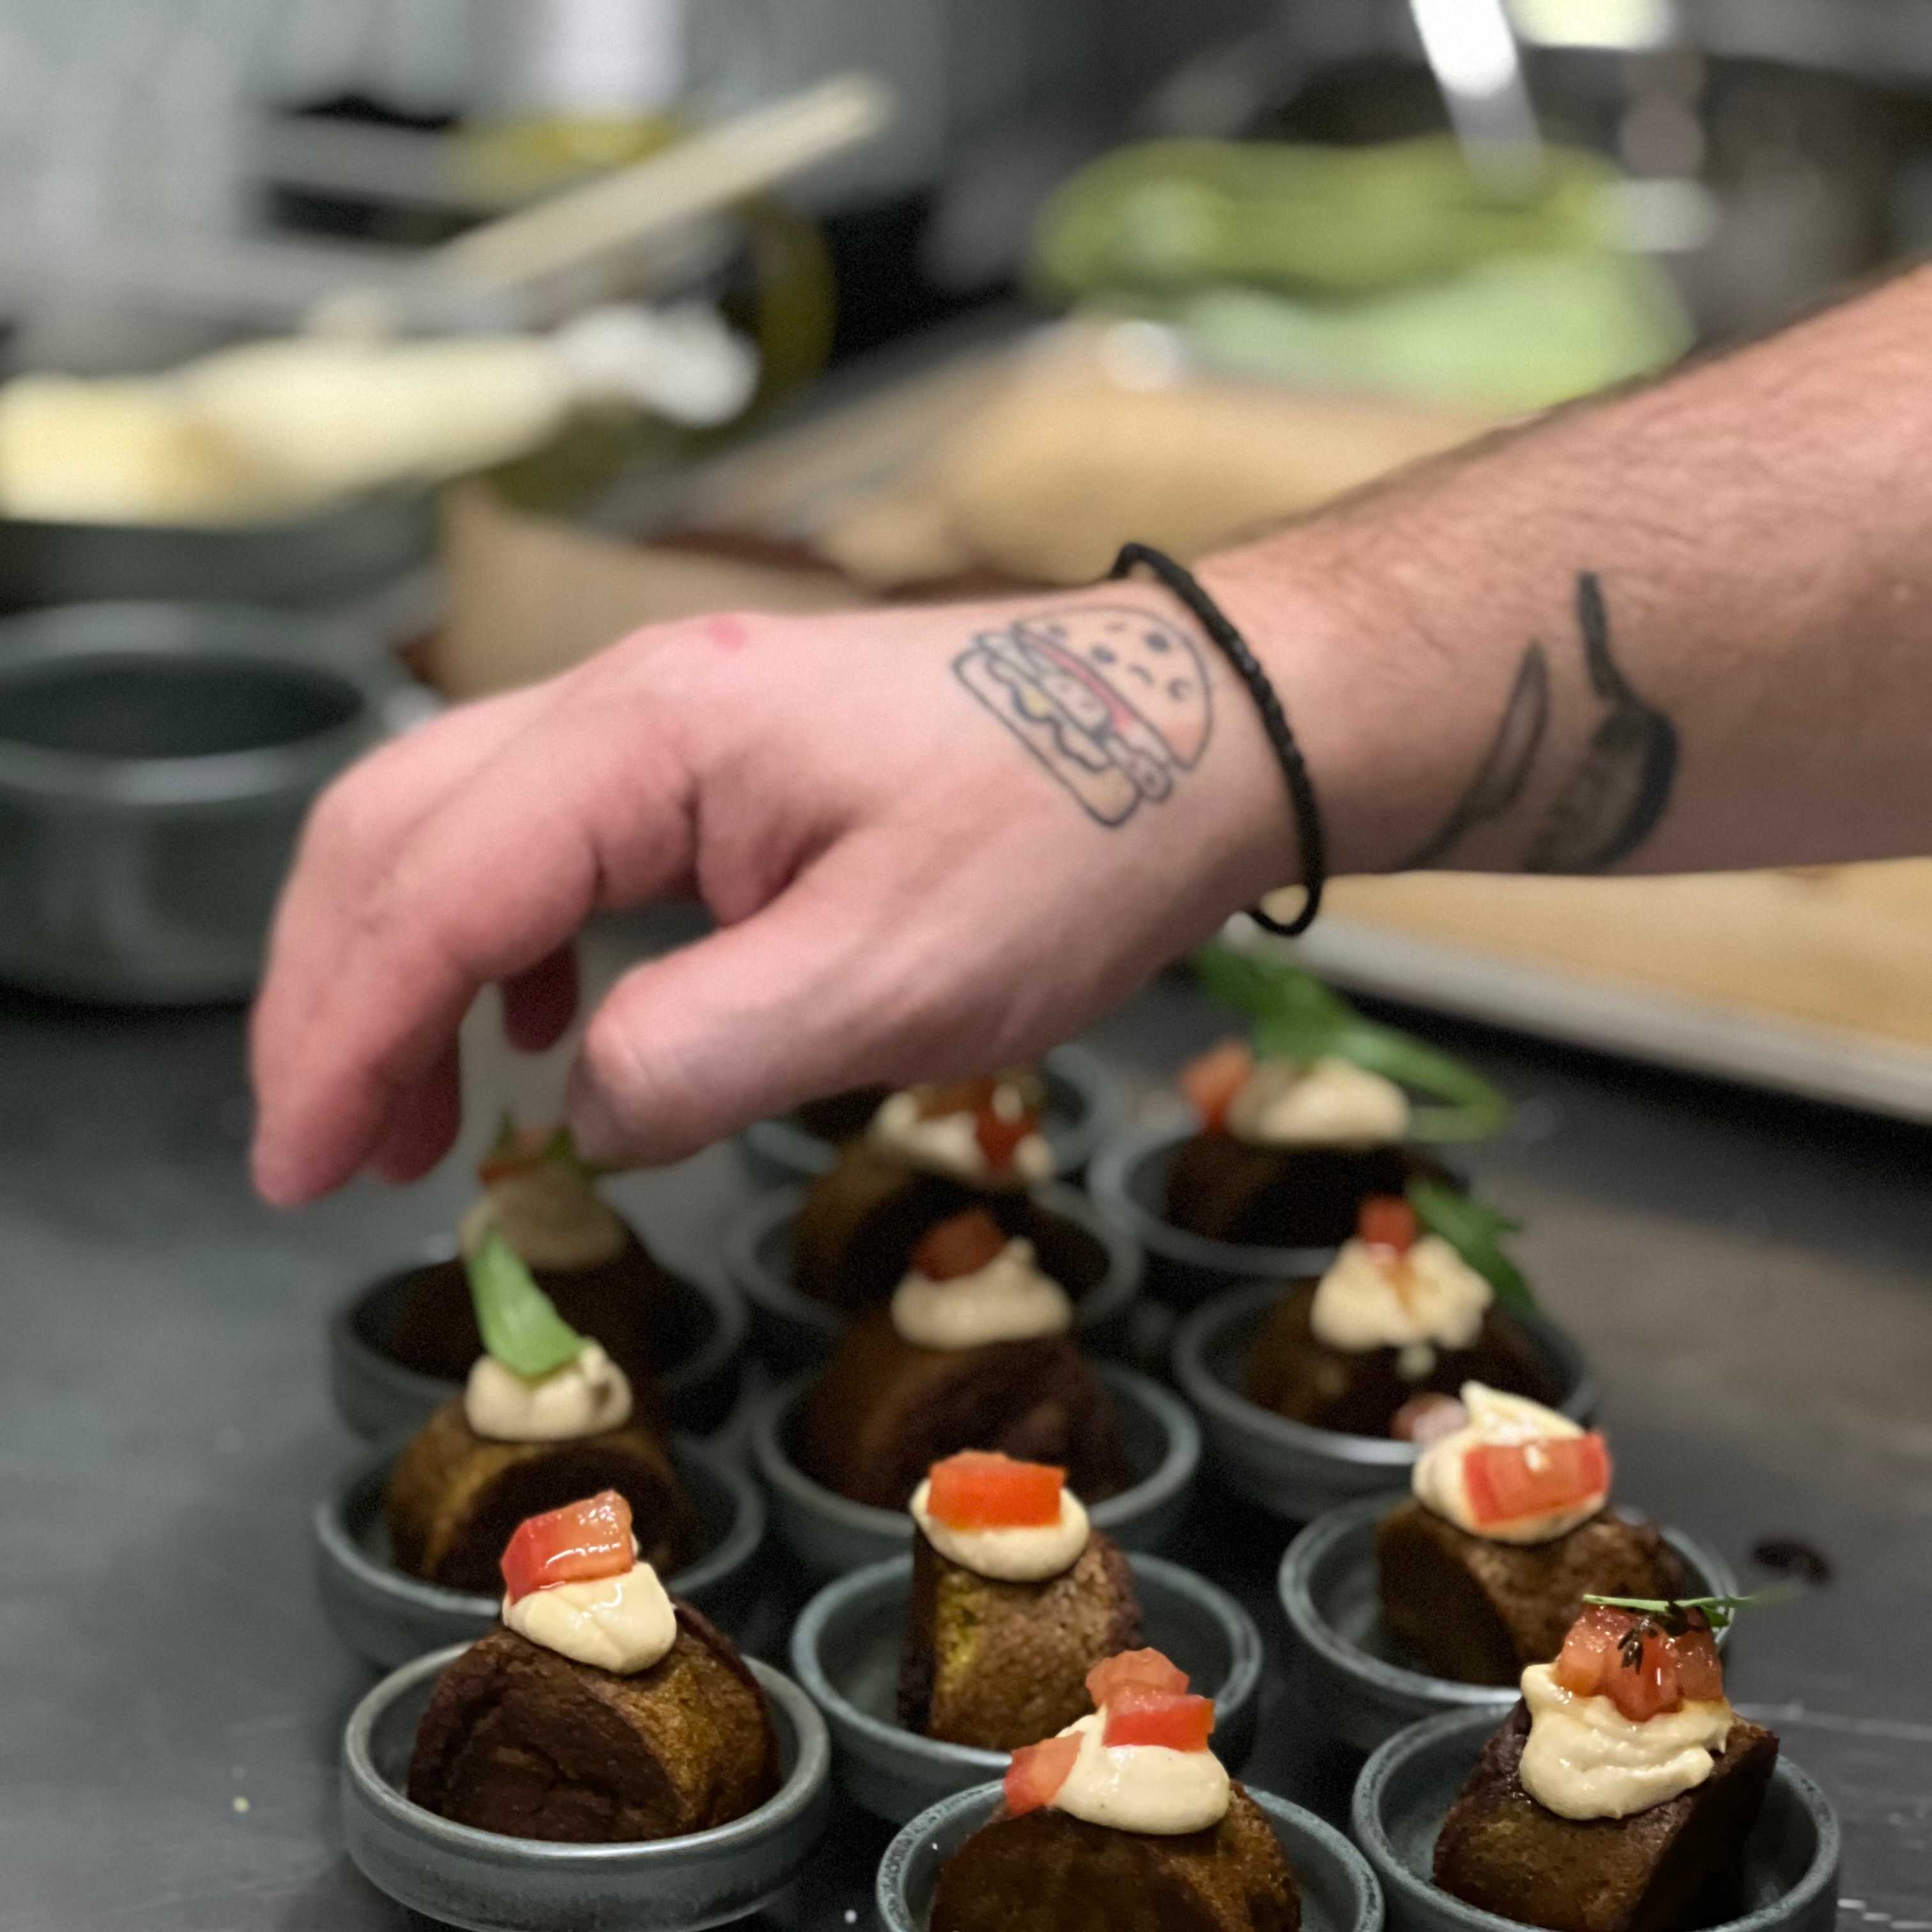 A picture of our chef preparing food for an event